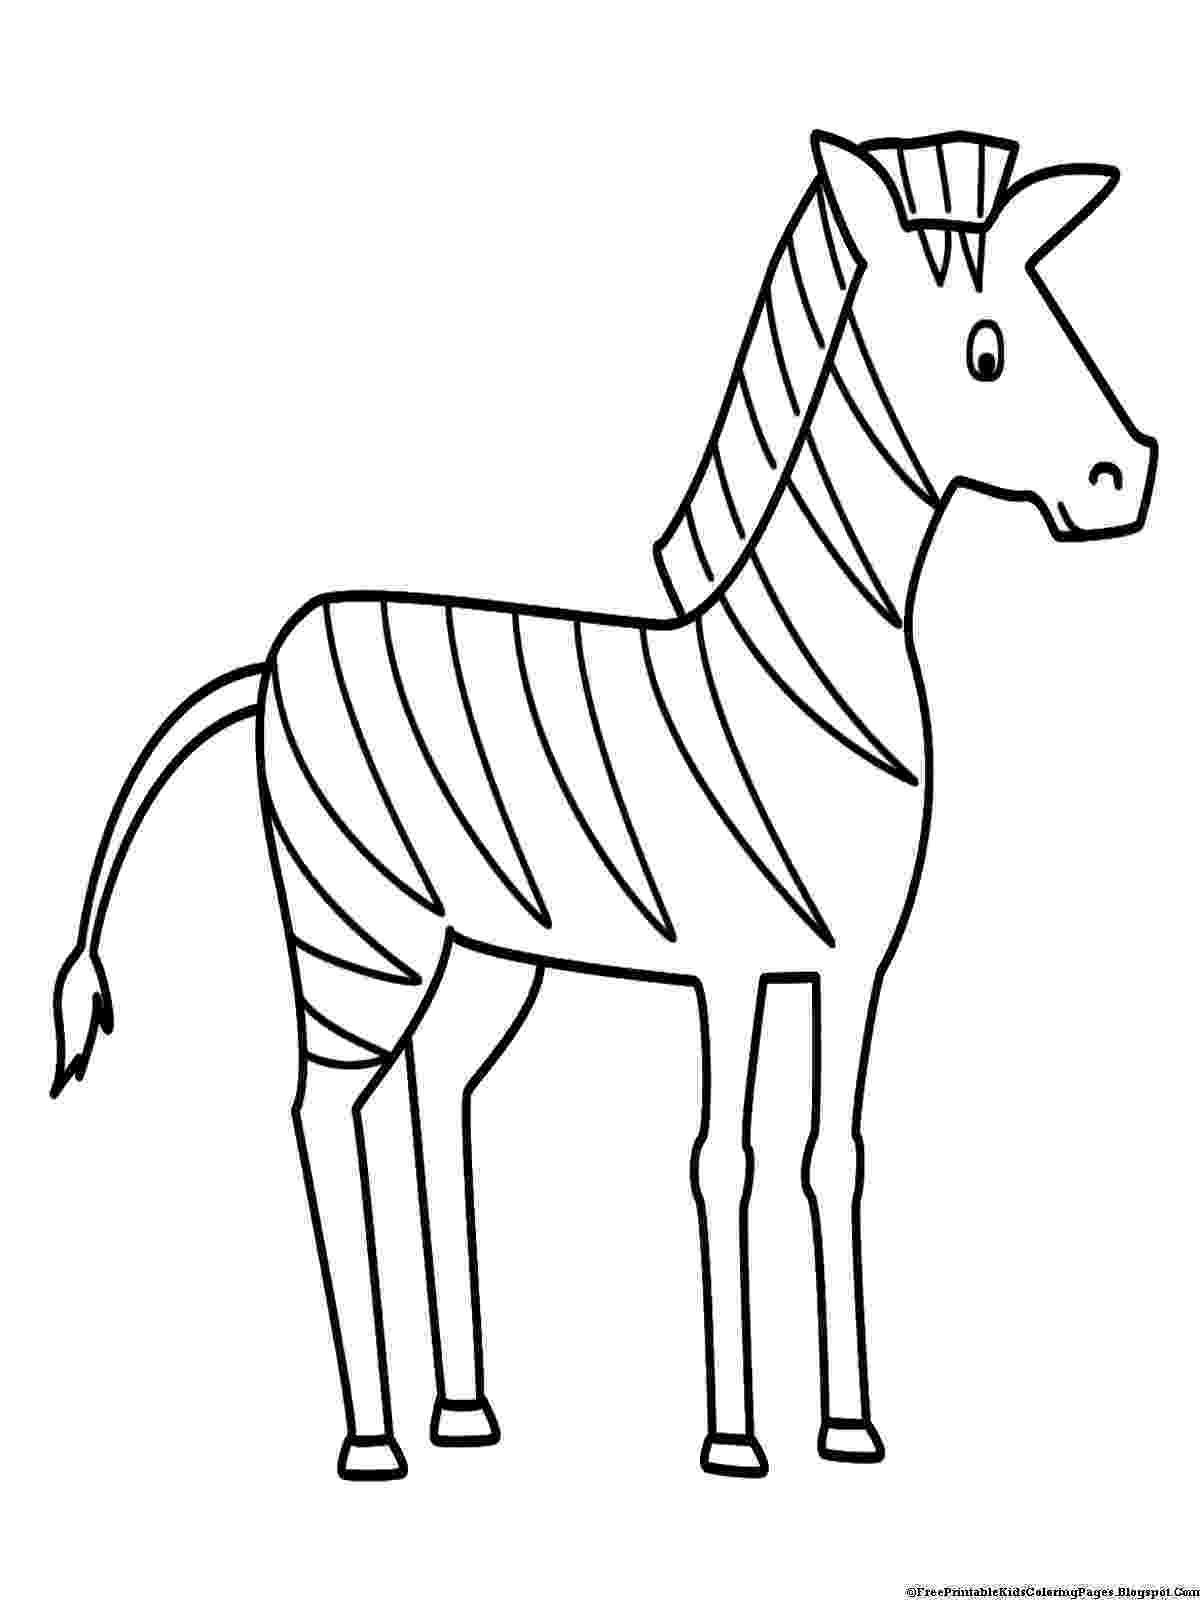 zebra coloring book zebra coloring pages free printable kids coloring pages book coloring zebra 